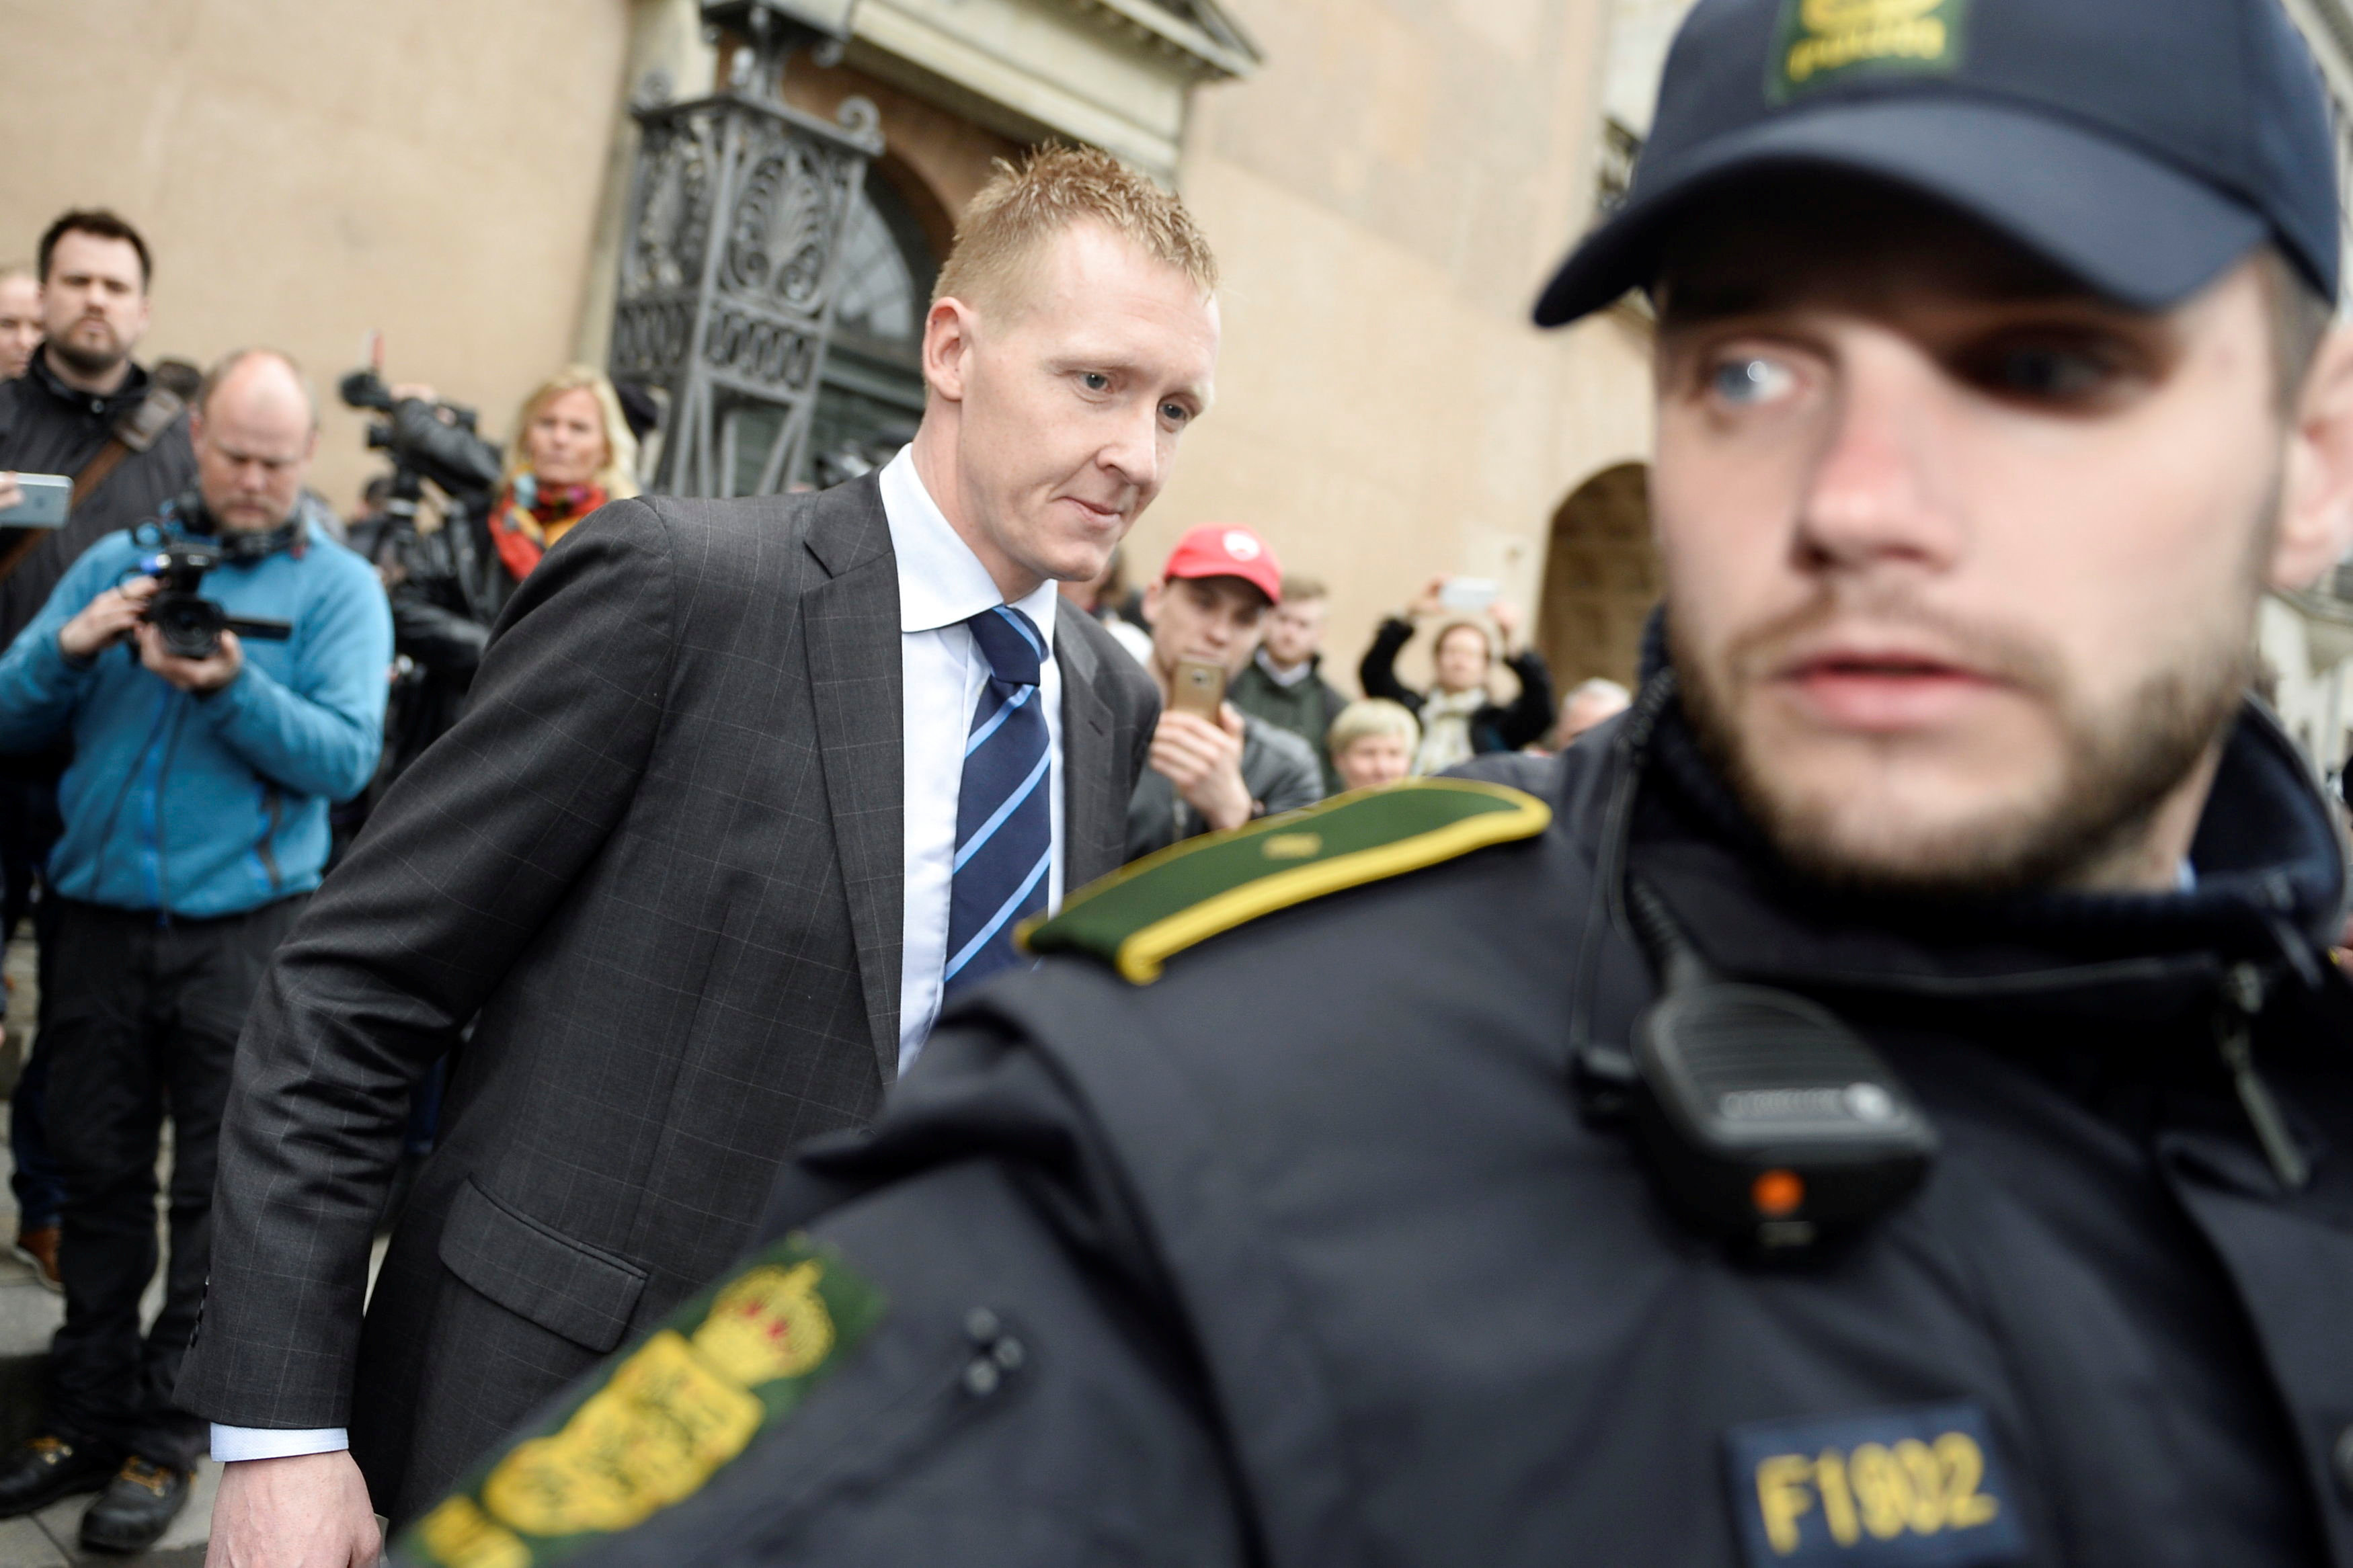 Prosecutor Jakob Buch-Jepsen leaves after a media briefing, in front of the courthouse in Copenhagen